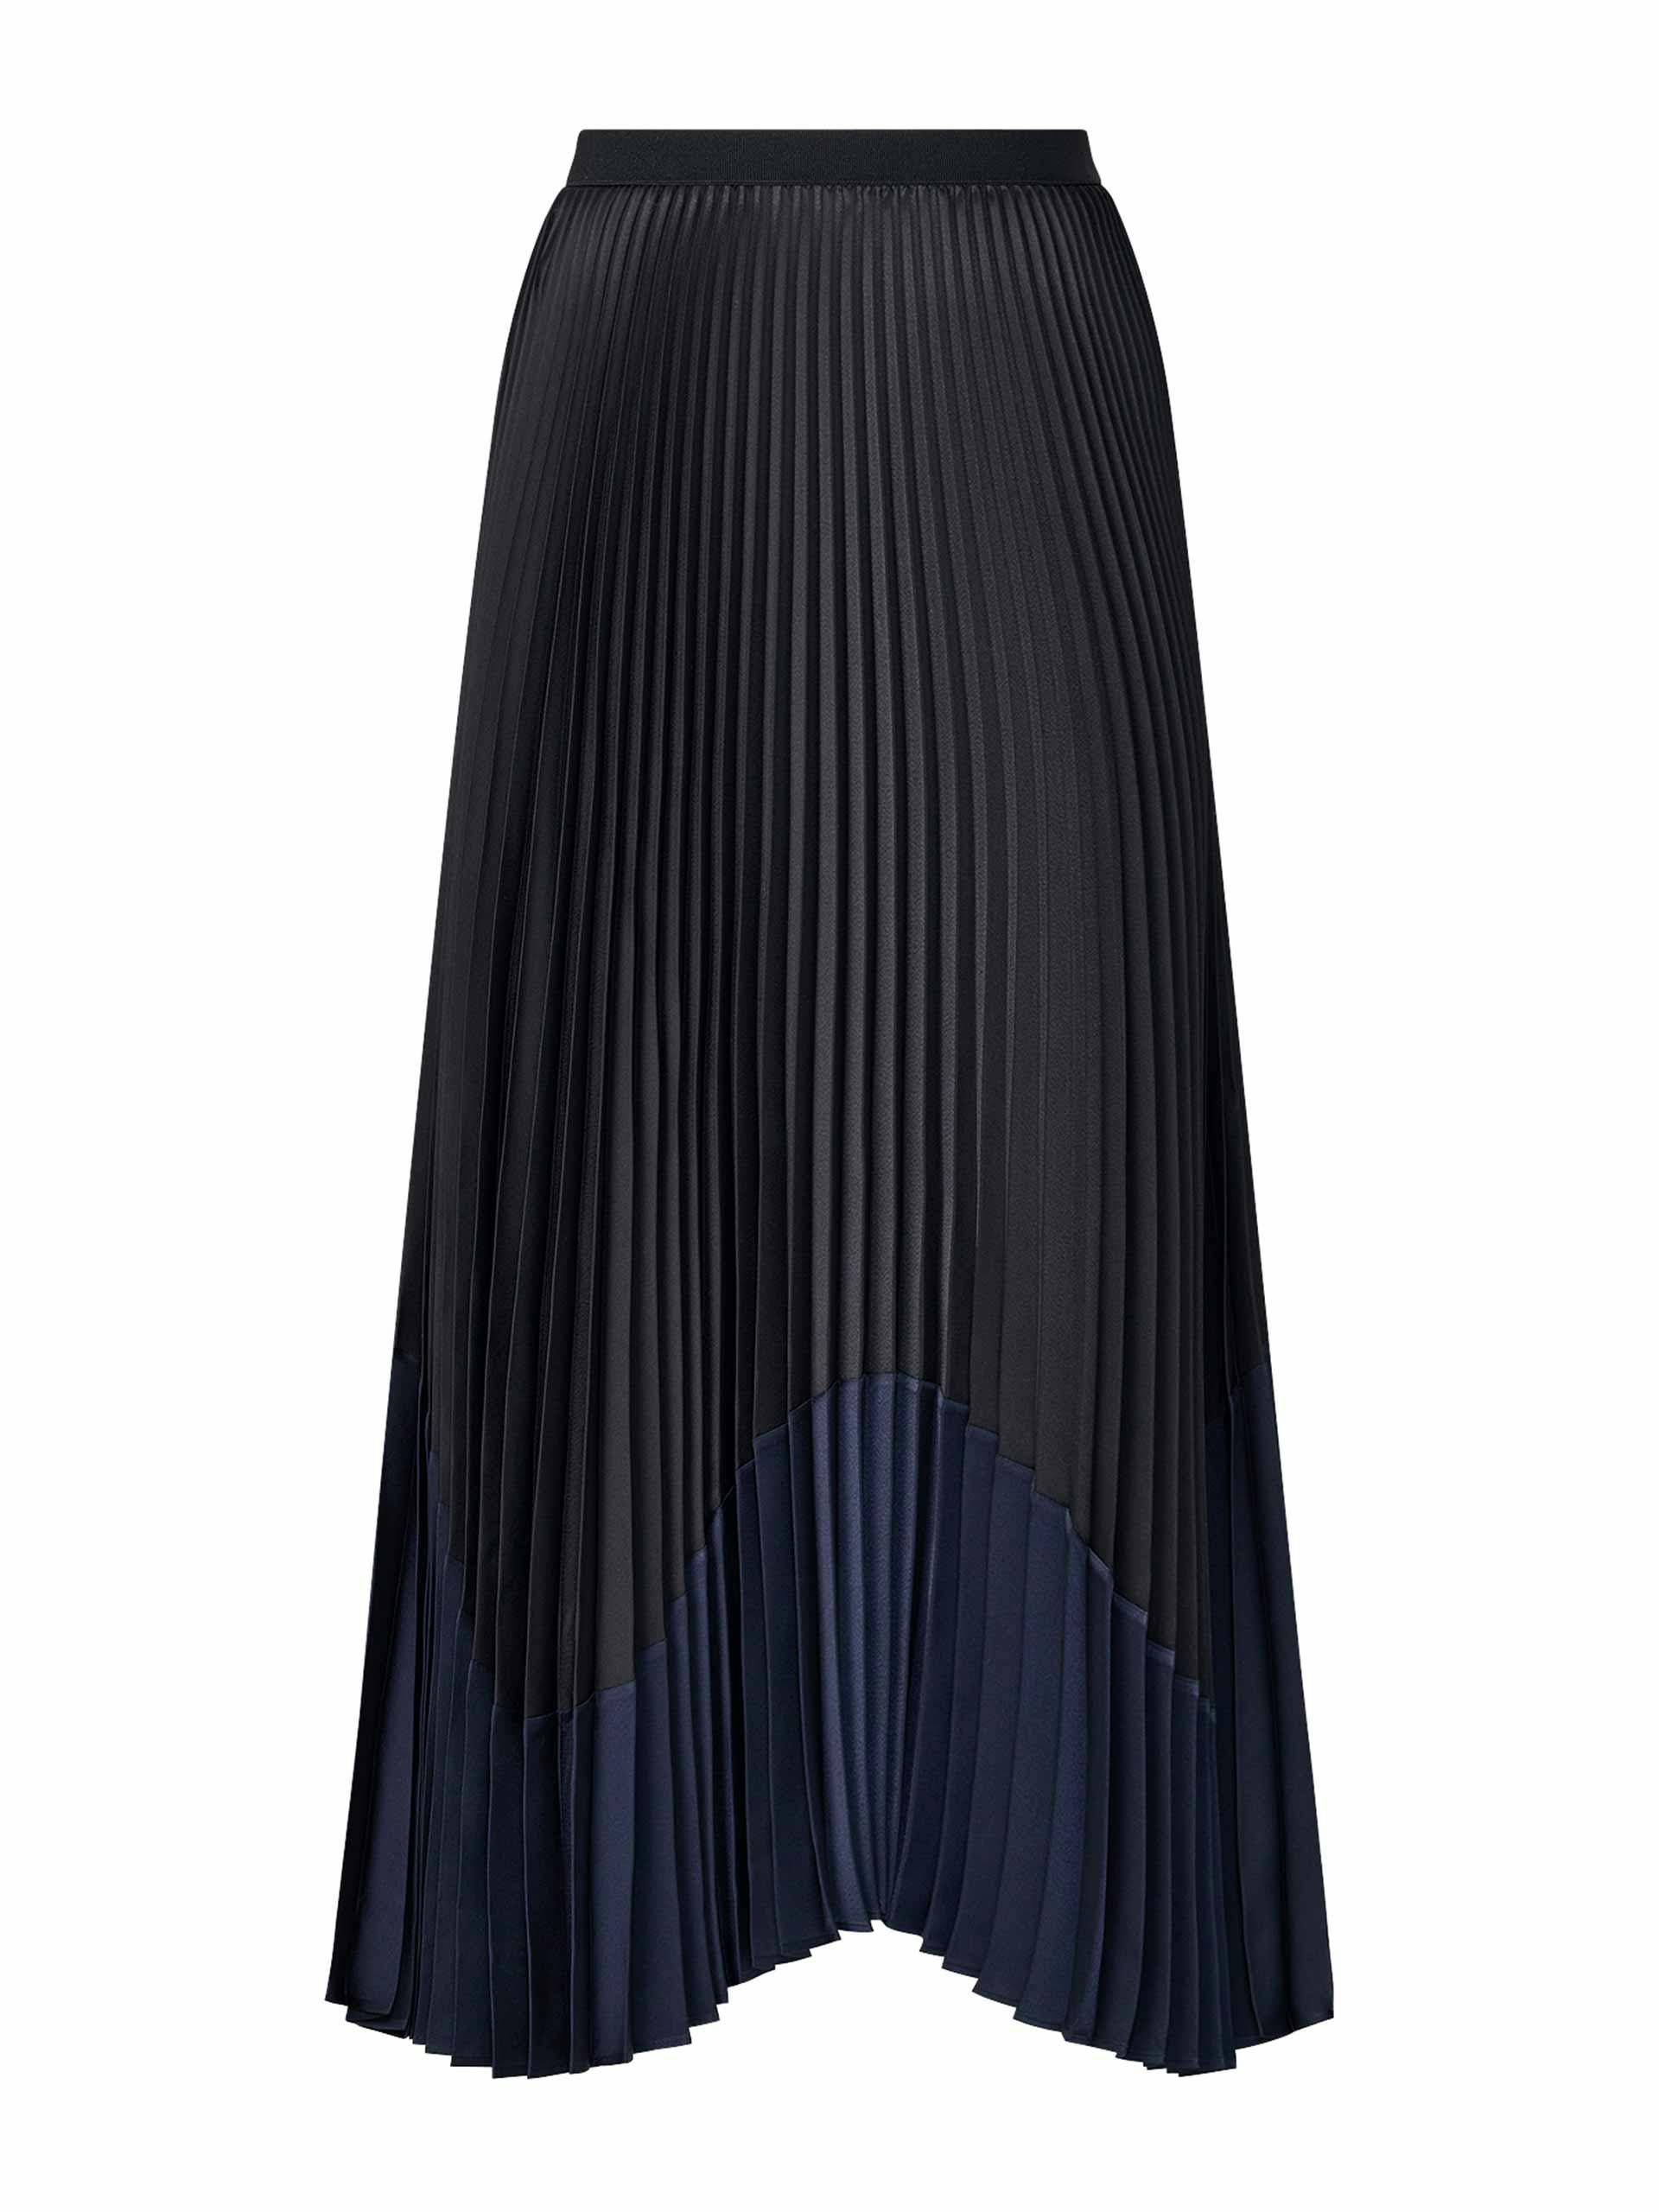 Black and navy pleated skirt